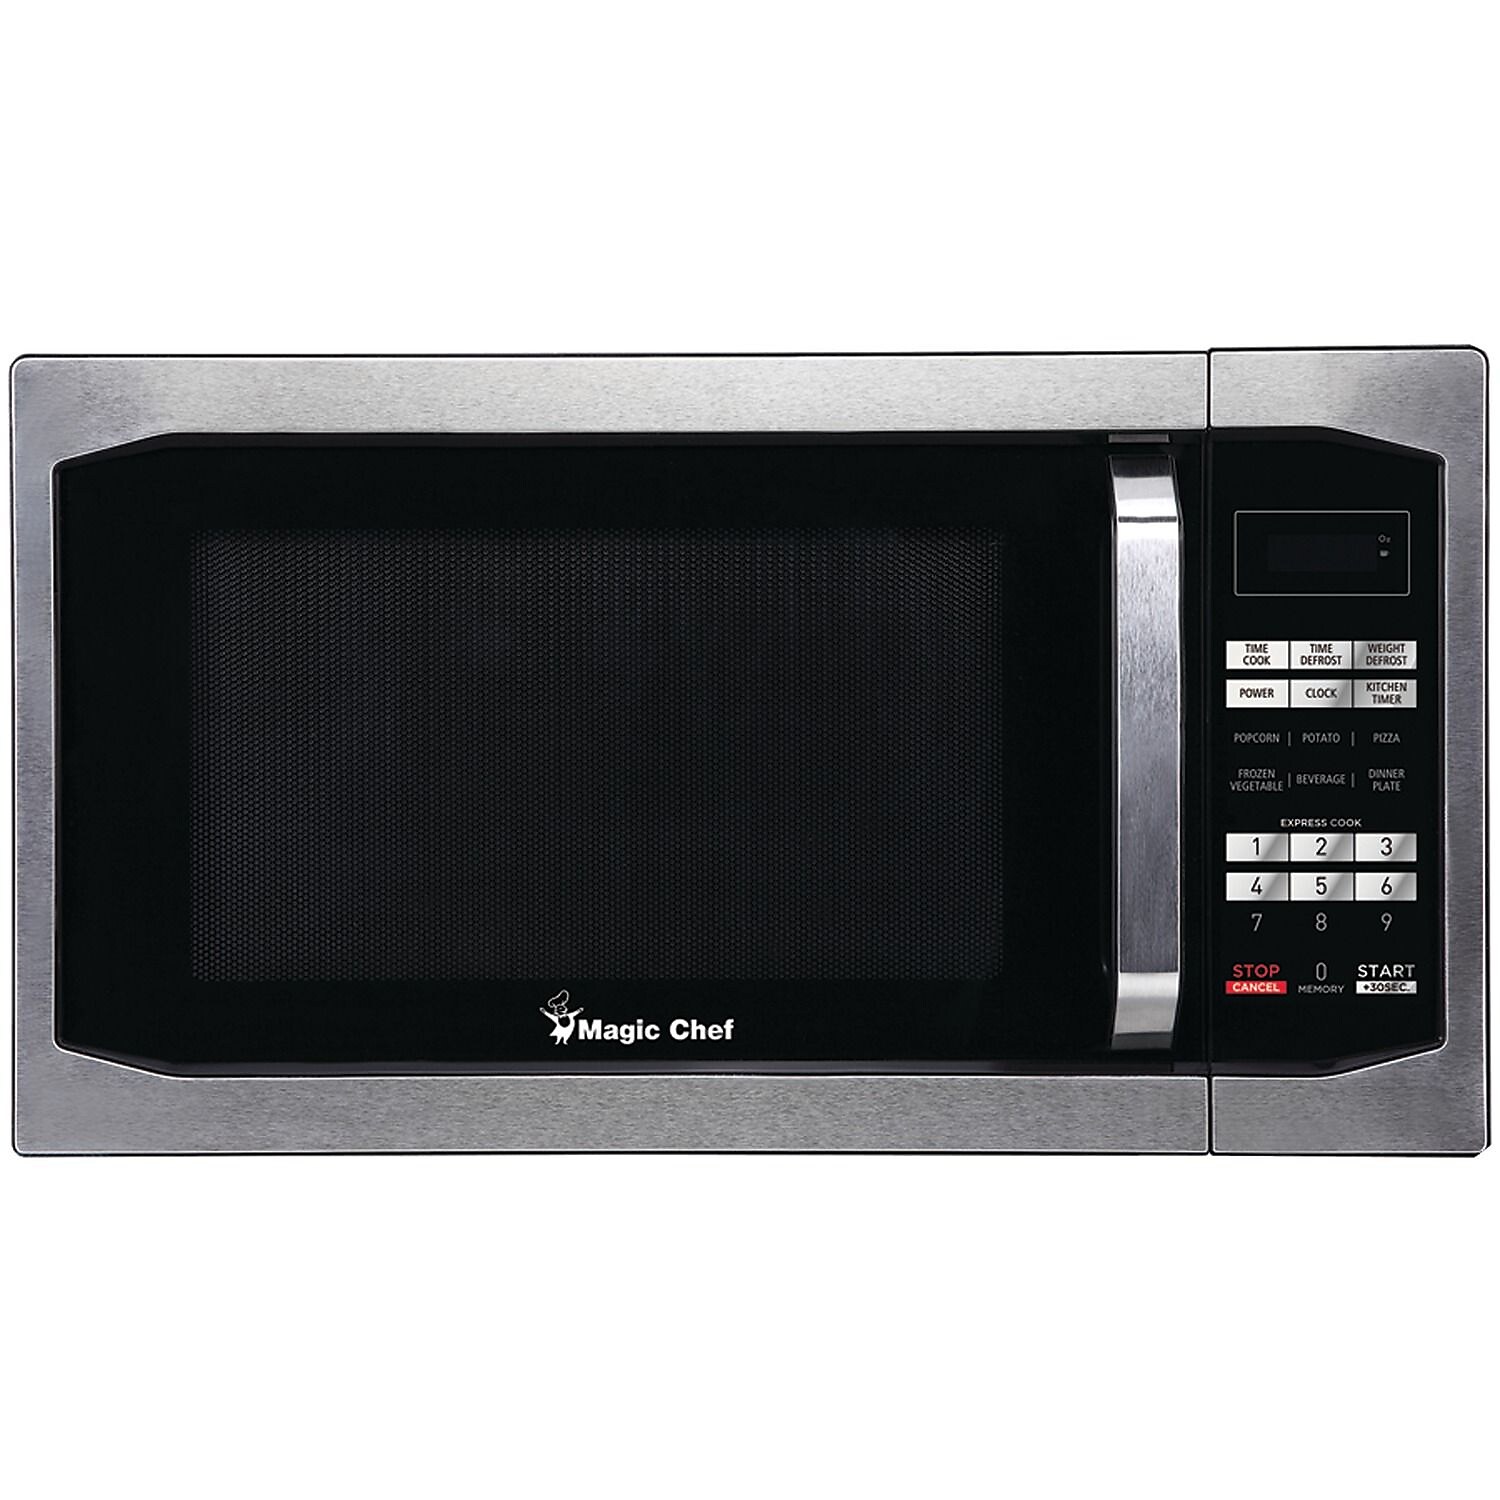 Magic Chef 1.6 cu. ft. Countertop Microwave in Stainless steel